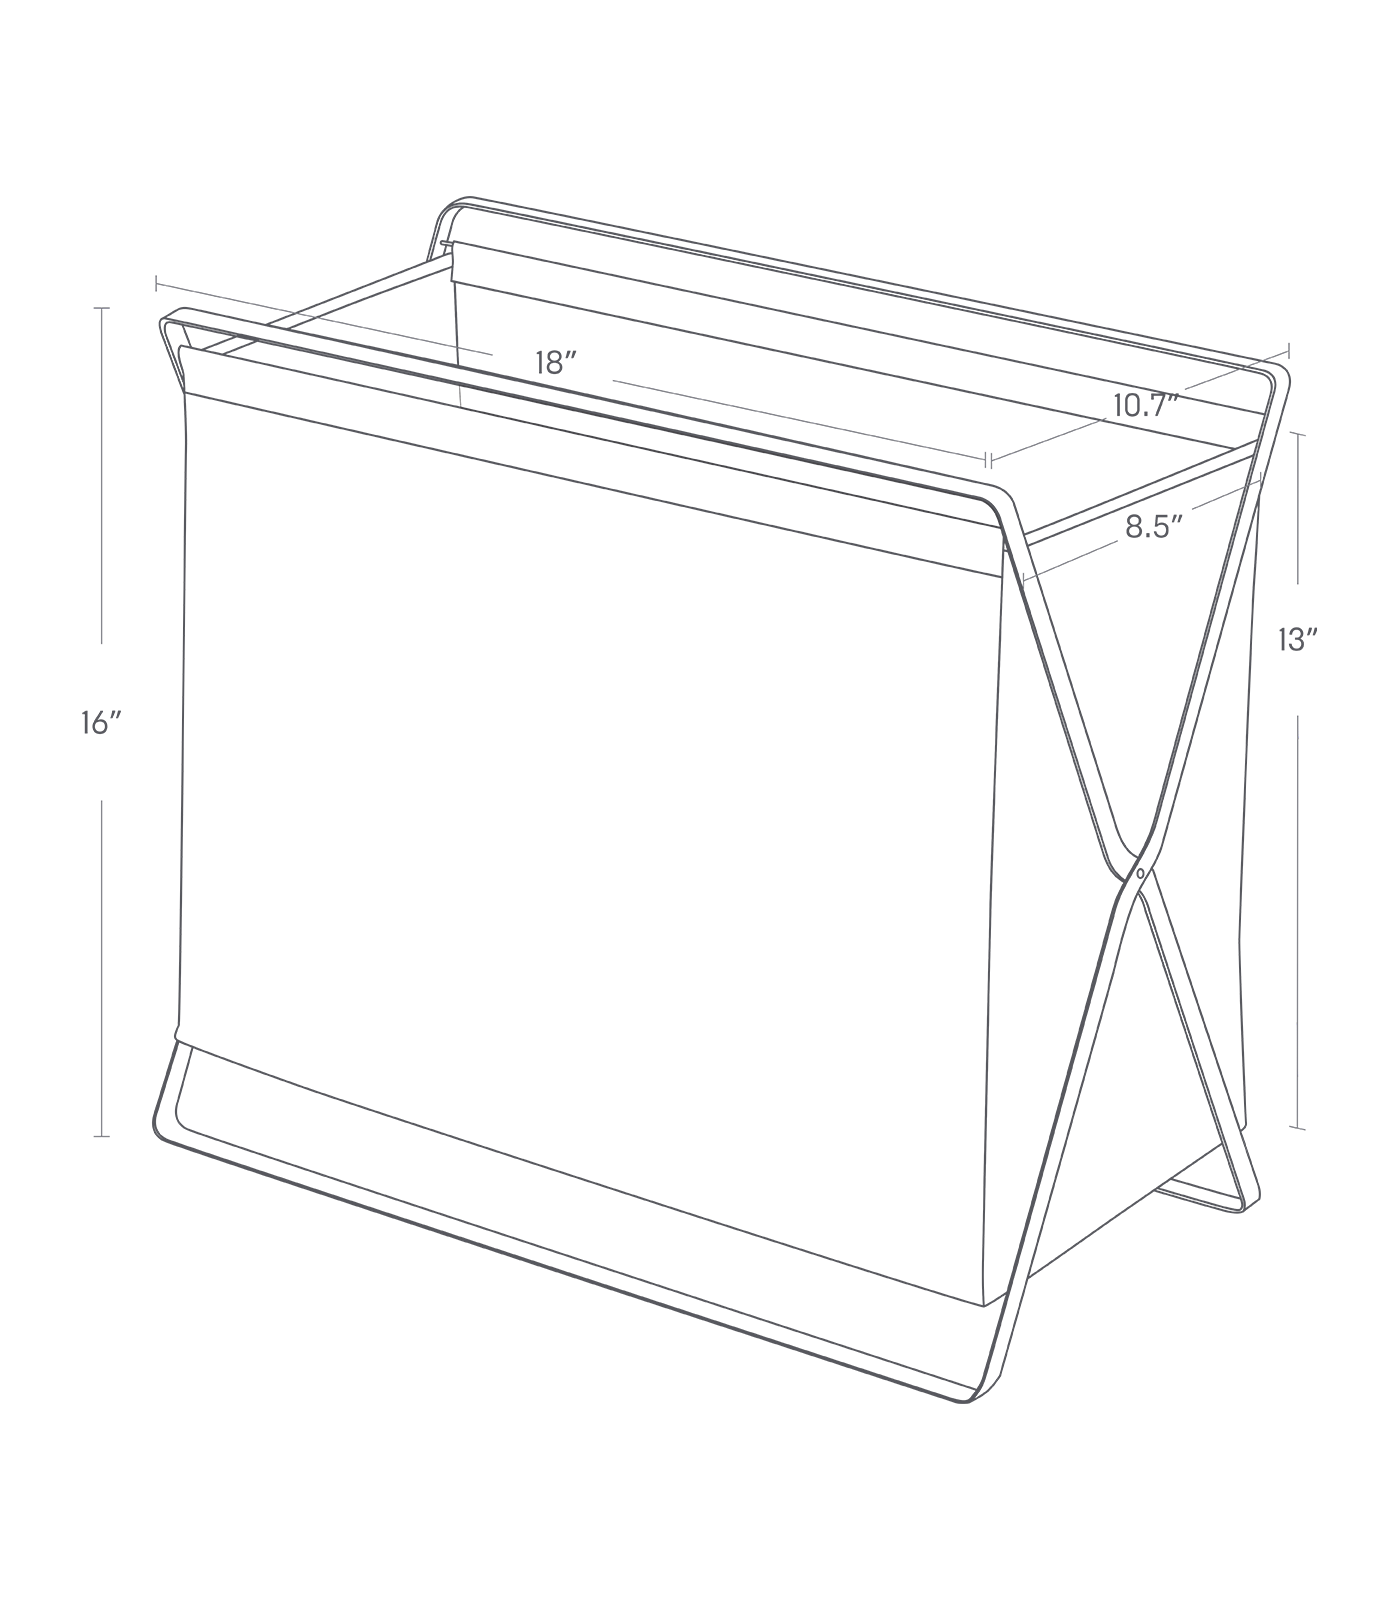 Dimension image for Folding Storage Hamper - Two Sizes on a white background including dimensions  L 11.42 x W 18.11 x H 15.75 inches